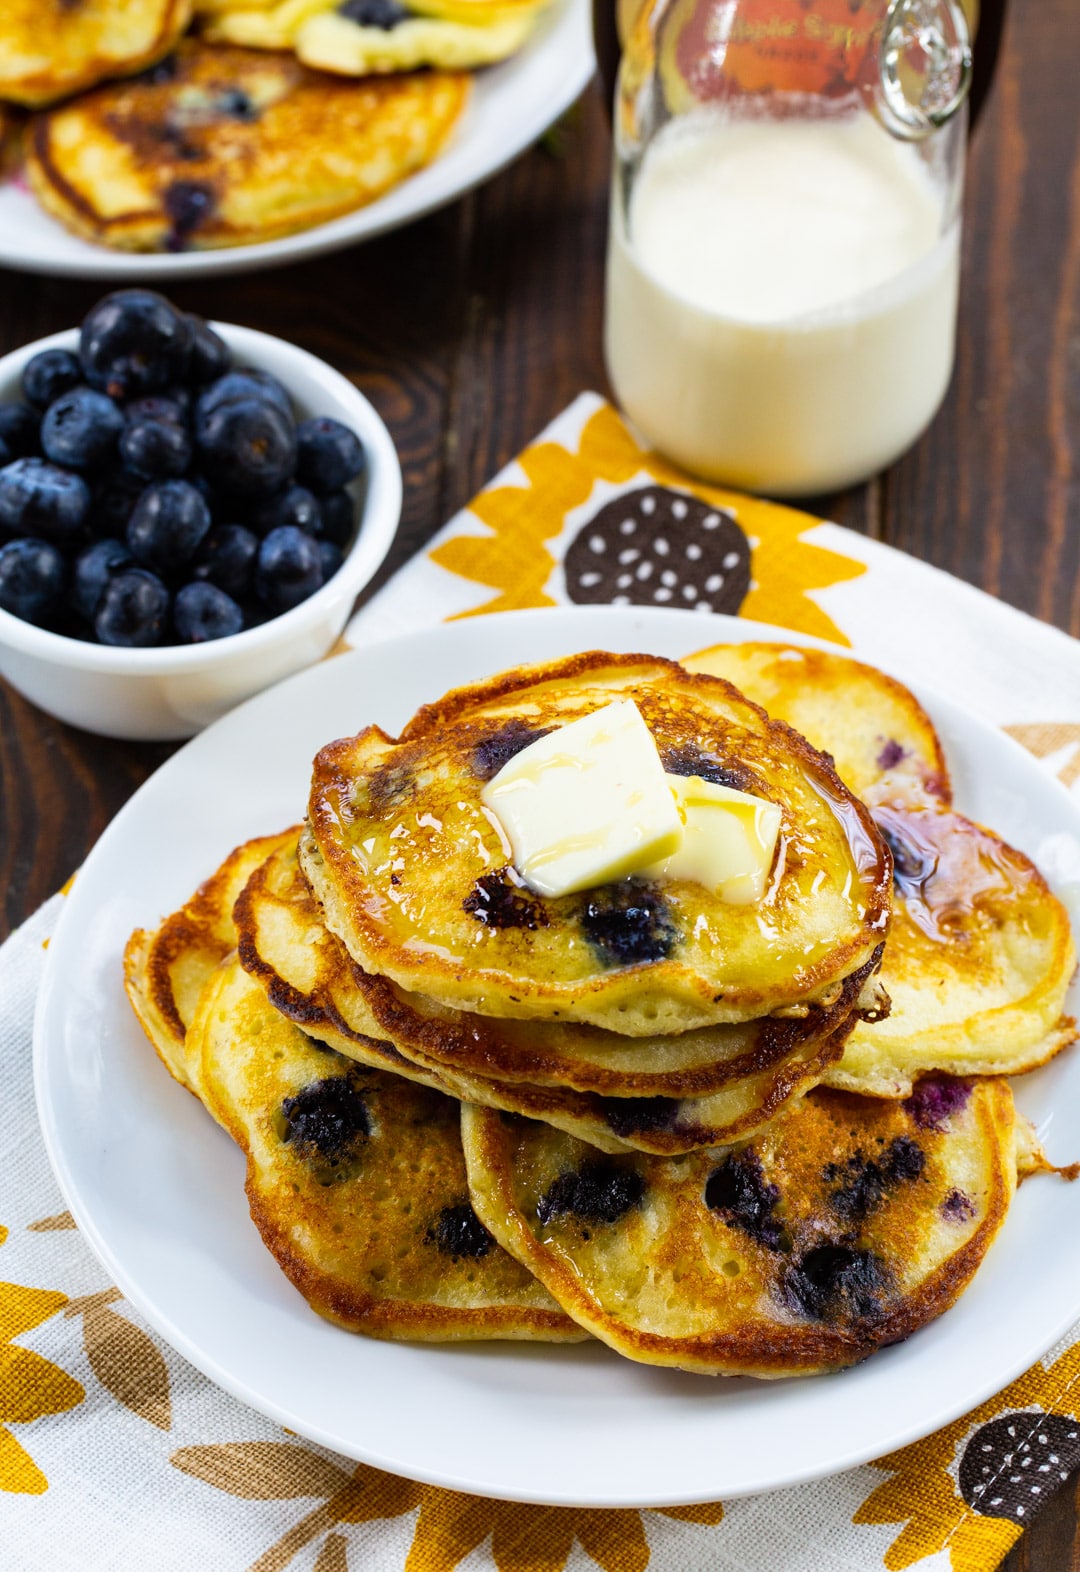 Pancakes on a plate, bowl of blueberries, and jug of milk.